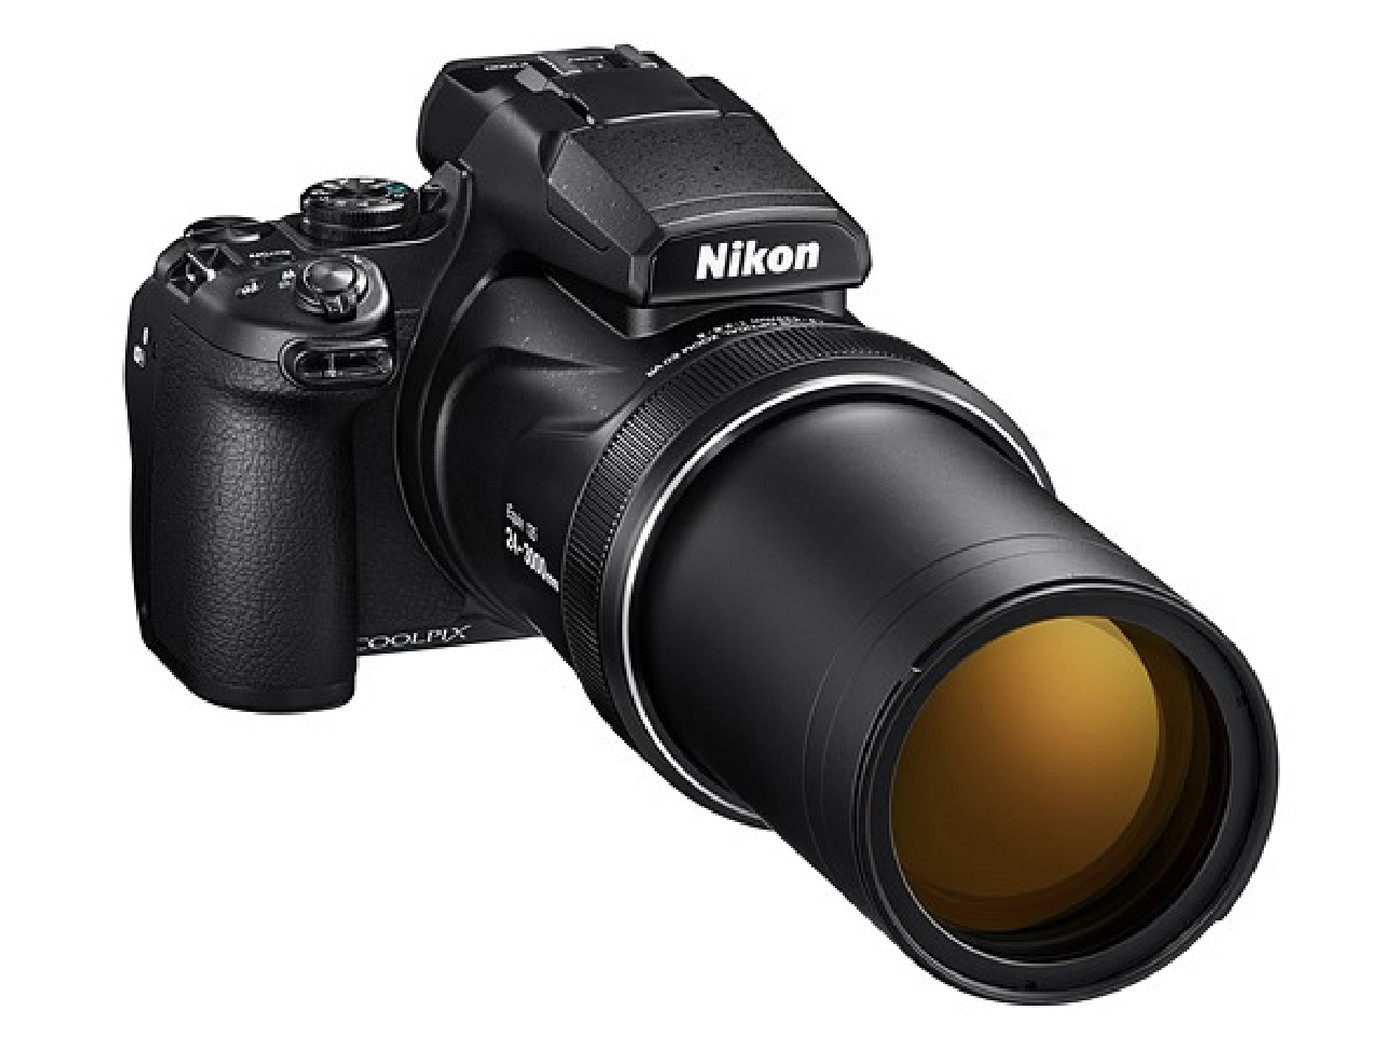 one Cannon surge Nikon Coolpix P1000 announced: specs, price, and release date - The Verge